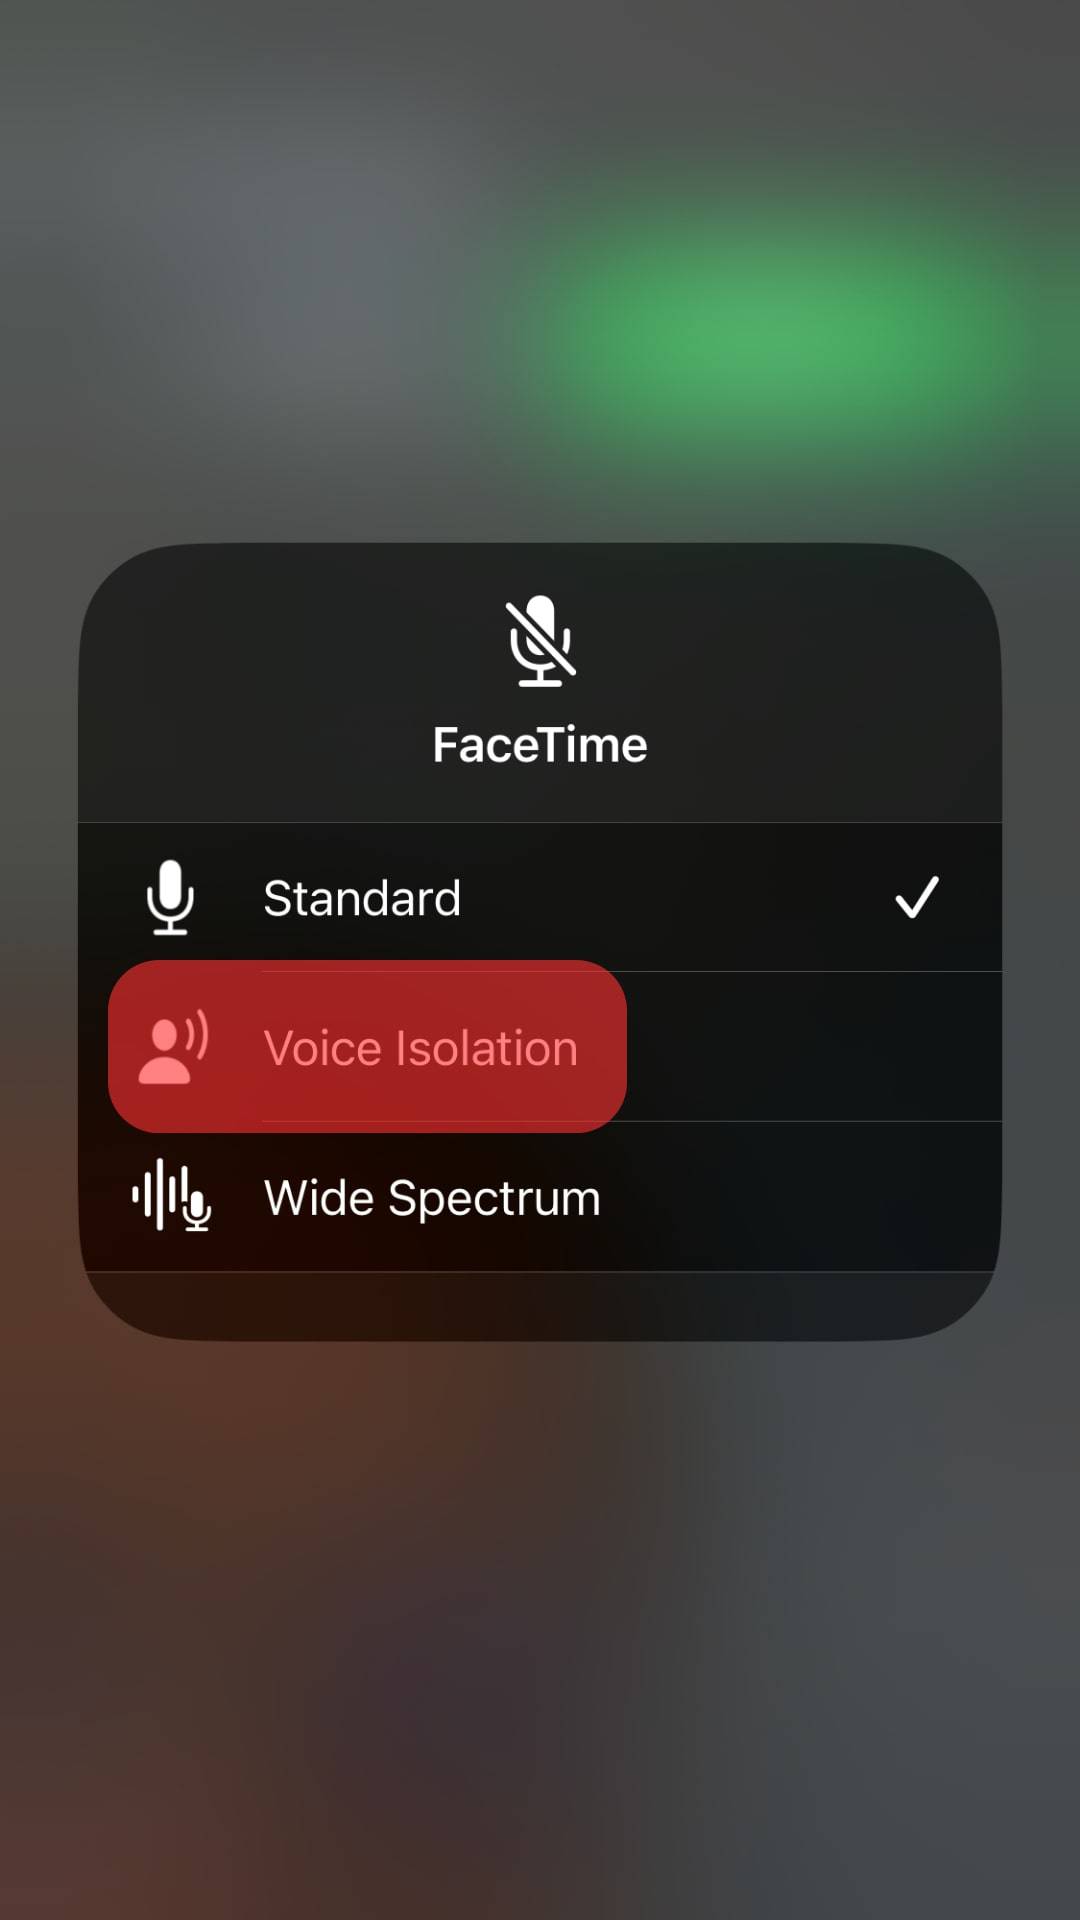 Select “Voice Isolation.”